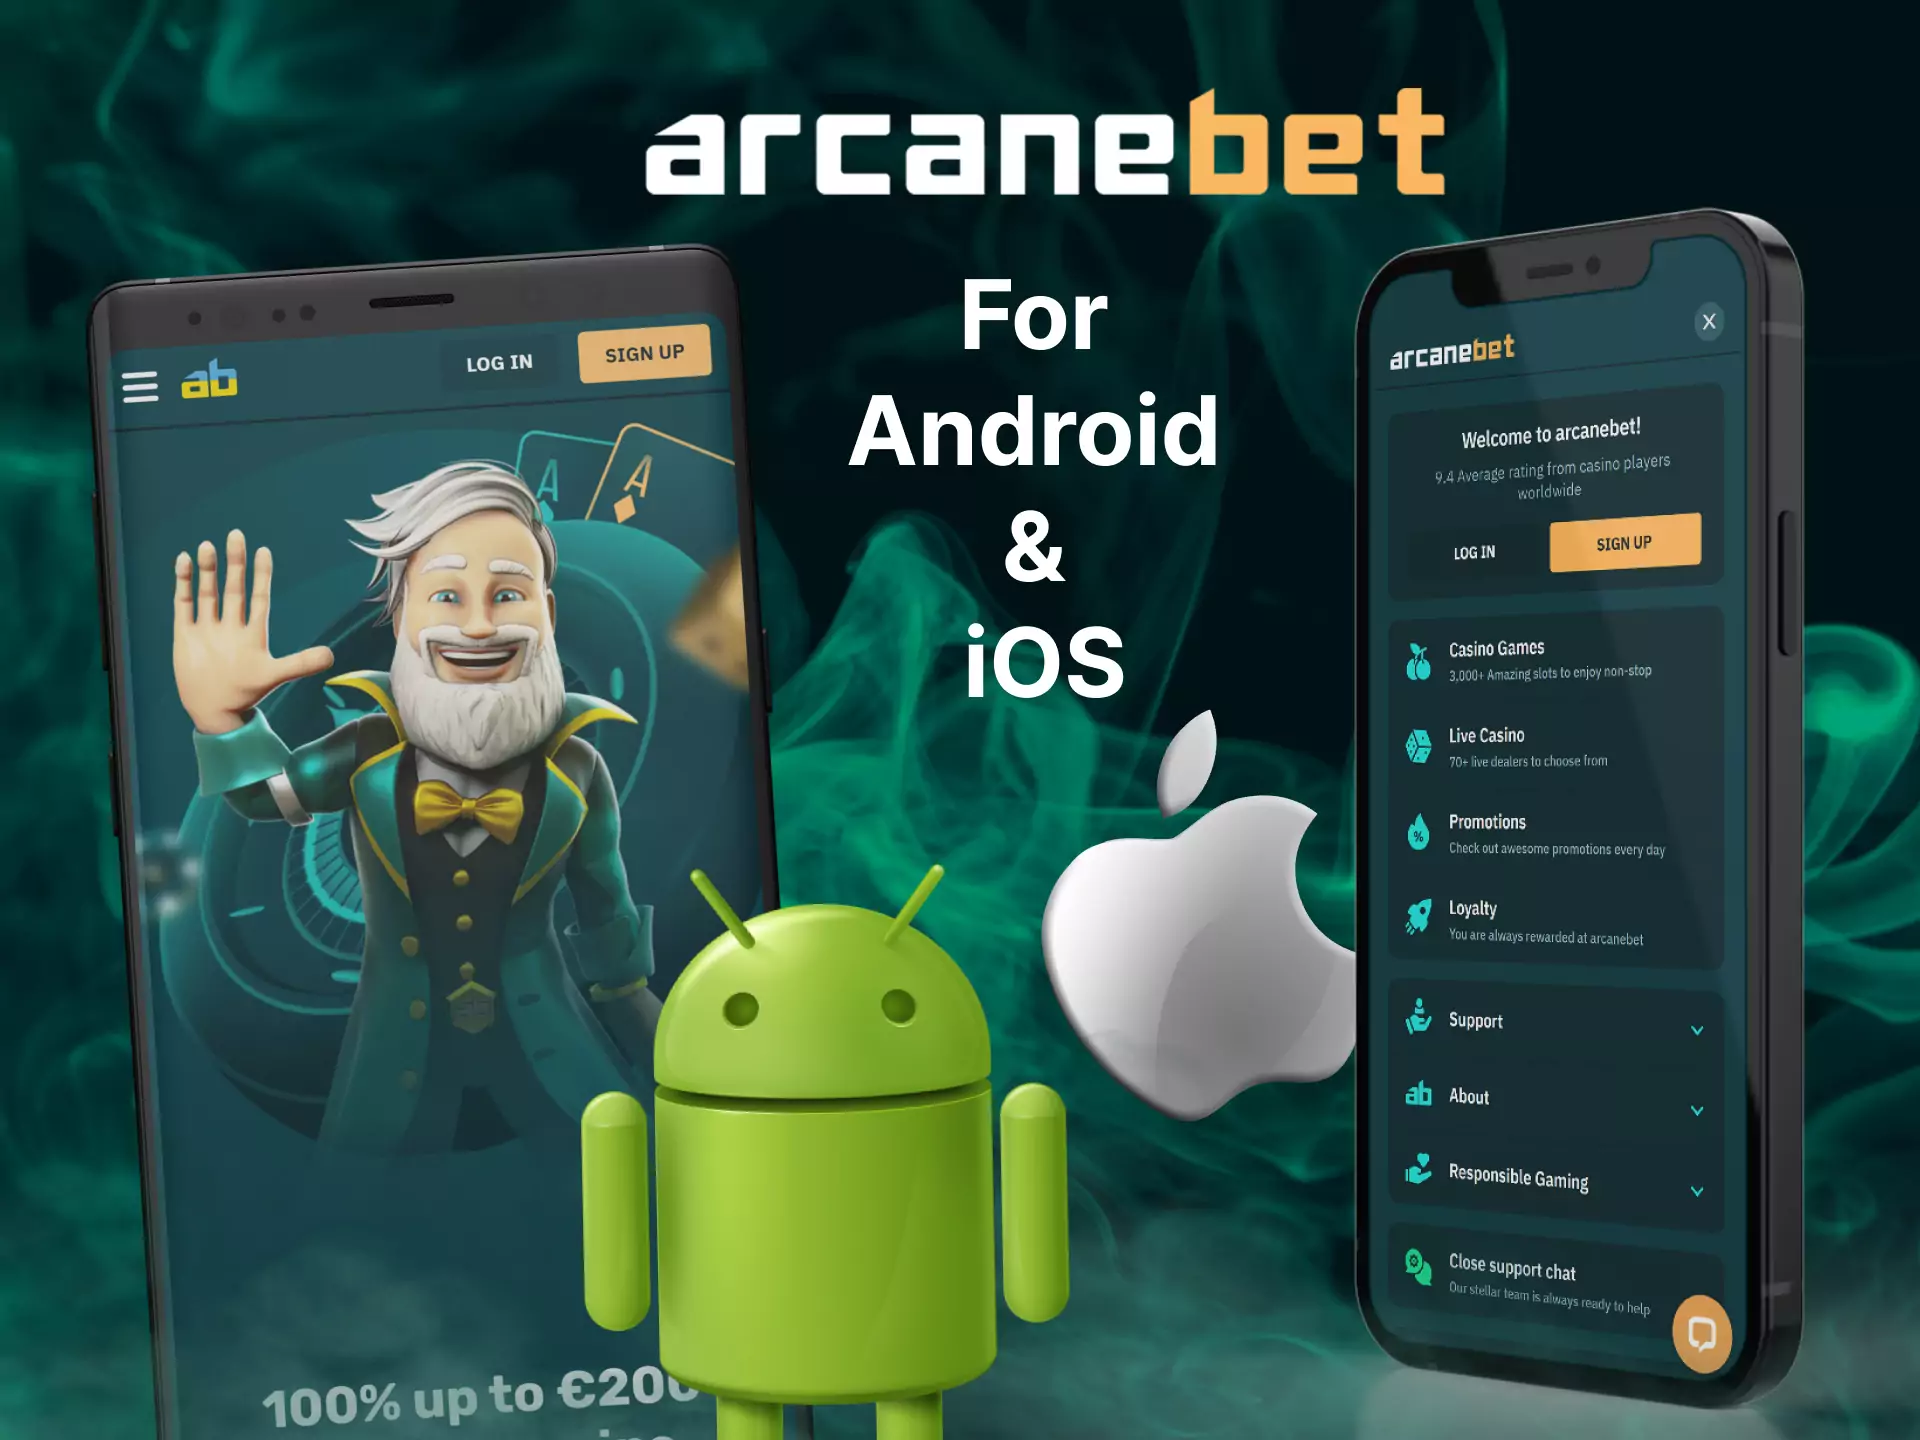 Use Arcanebet on any of your mobile devices, Android and iOS support.